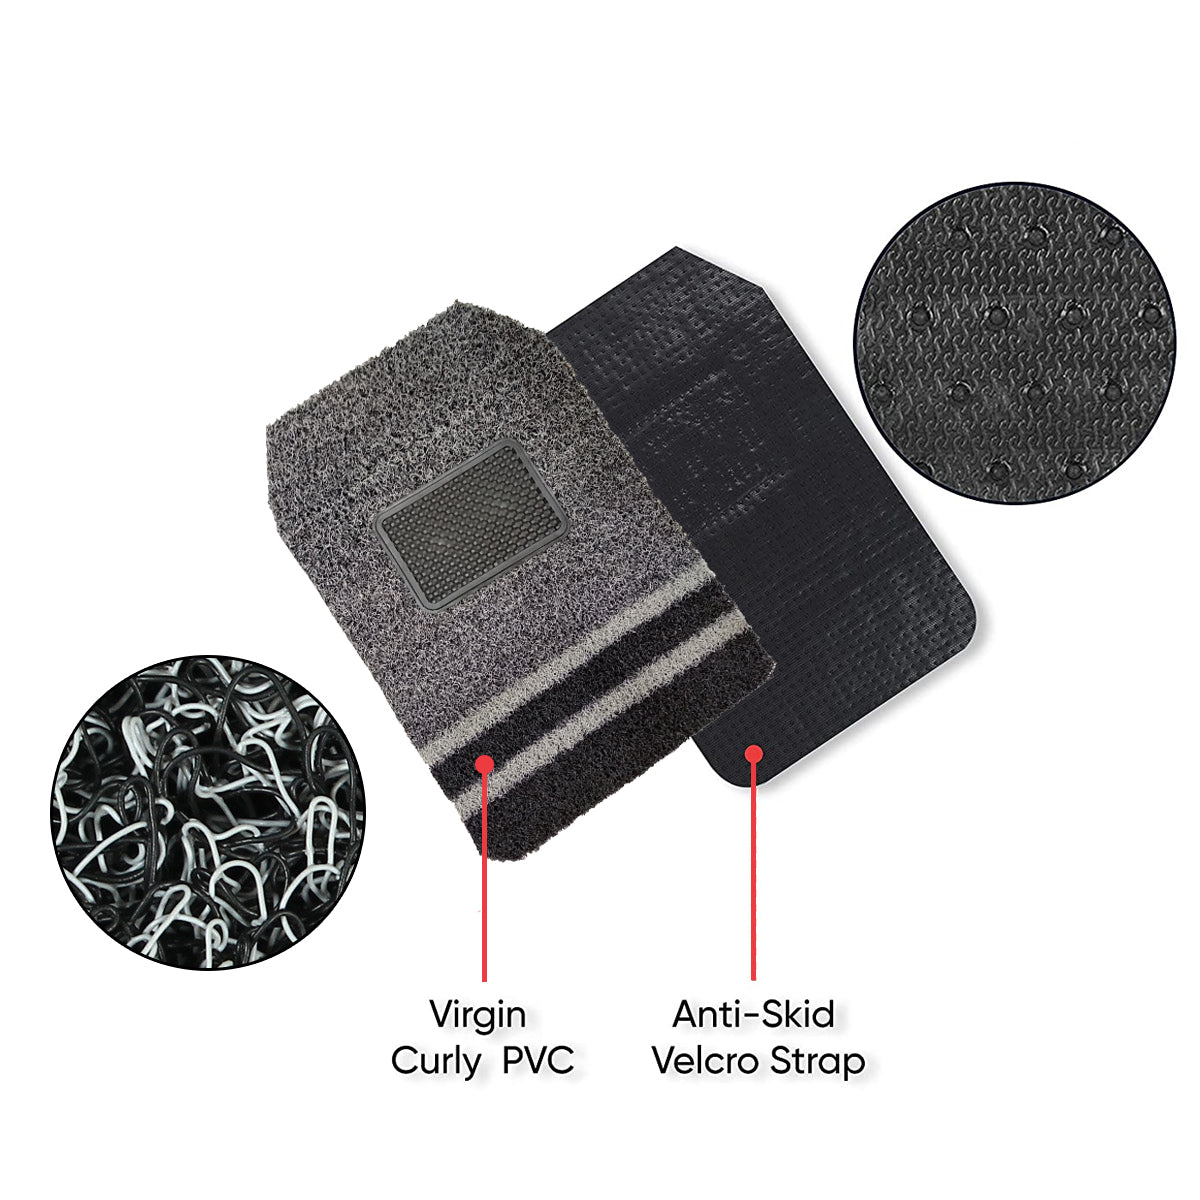 Oshotto Anti Skid Curly Noodle Grass 18mm Car Foot/Floor Mats for All Cars (Set of 5, Black,Grey)